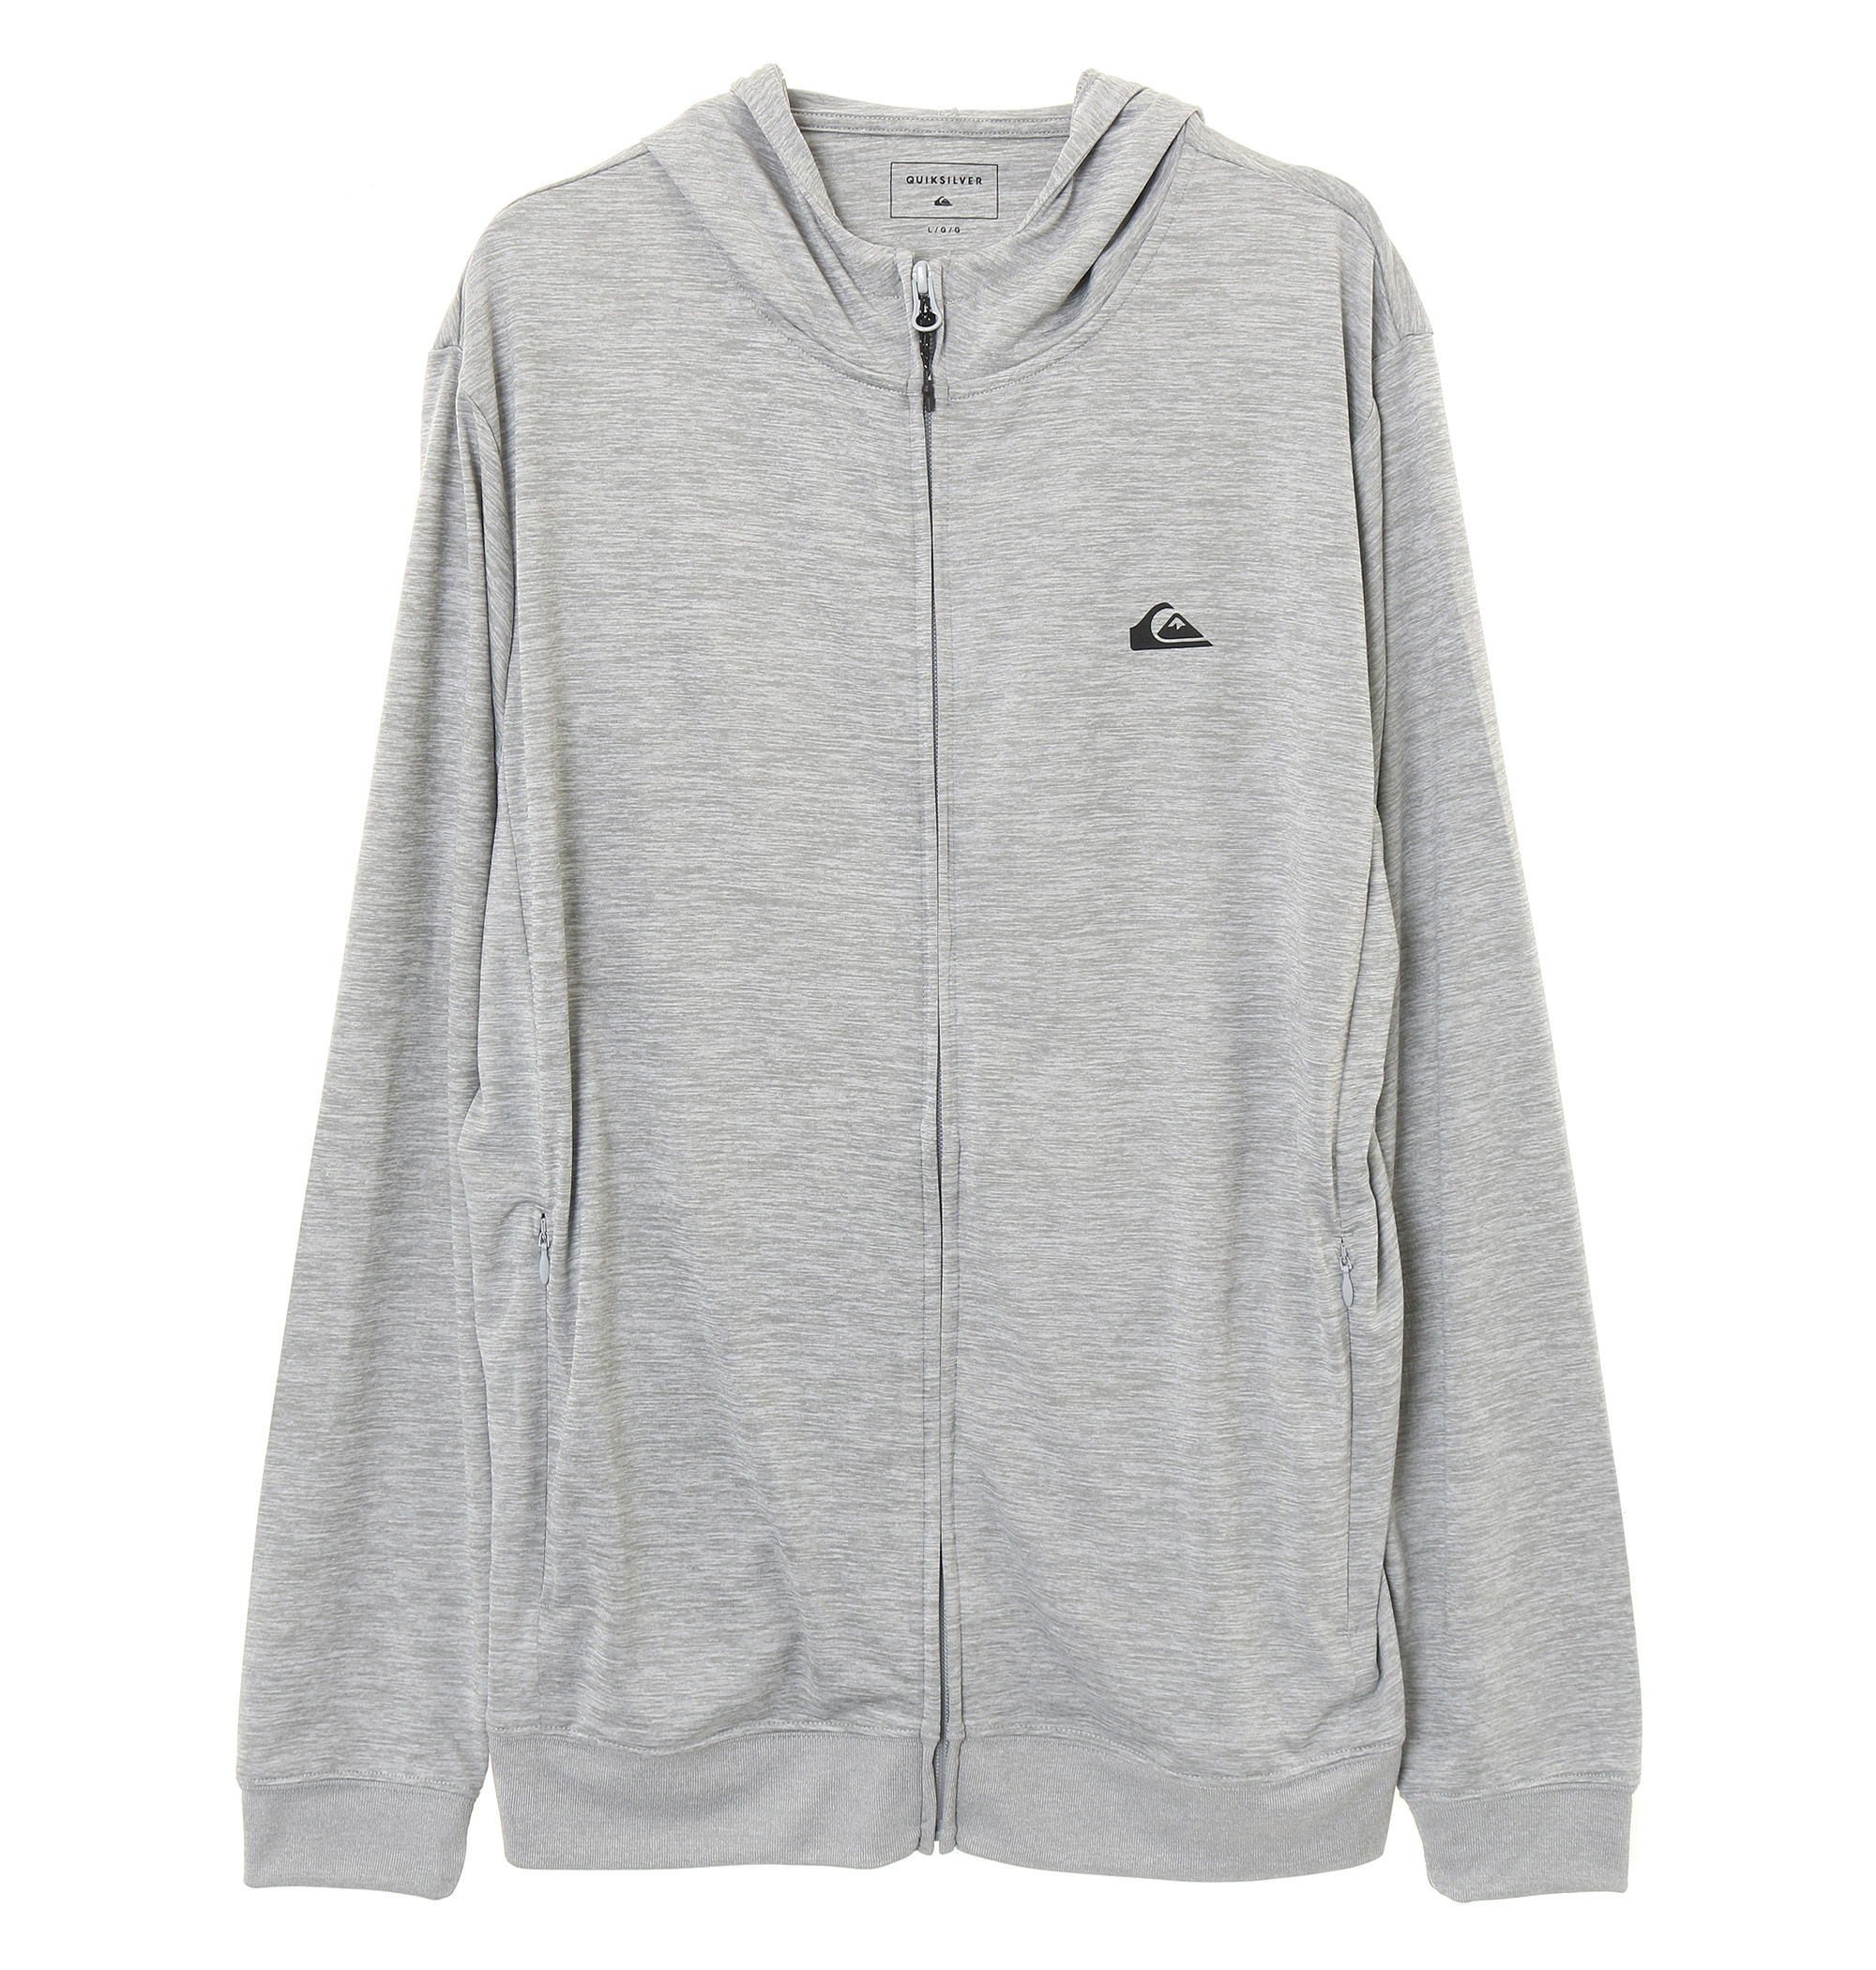 50%OFF！＜Quiksilver＞ QP MW ON CHEST HD 長袖パーカータイプのラッシュガード